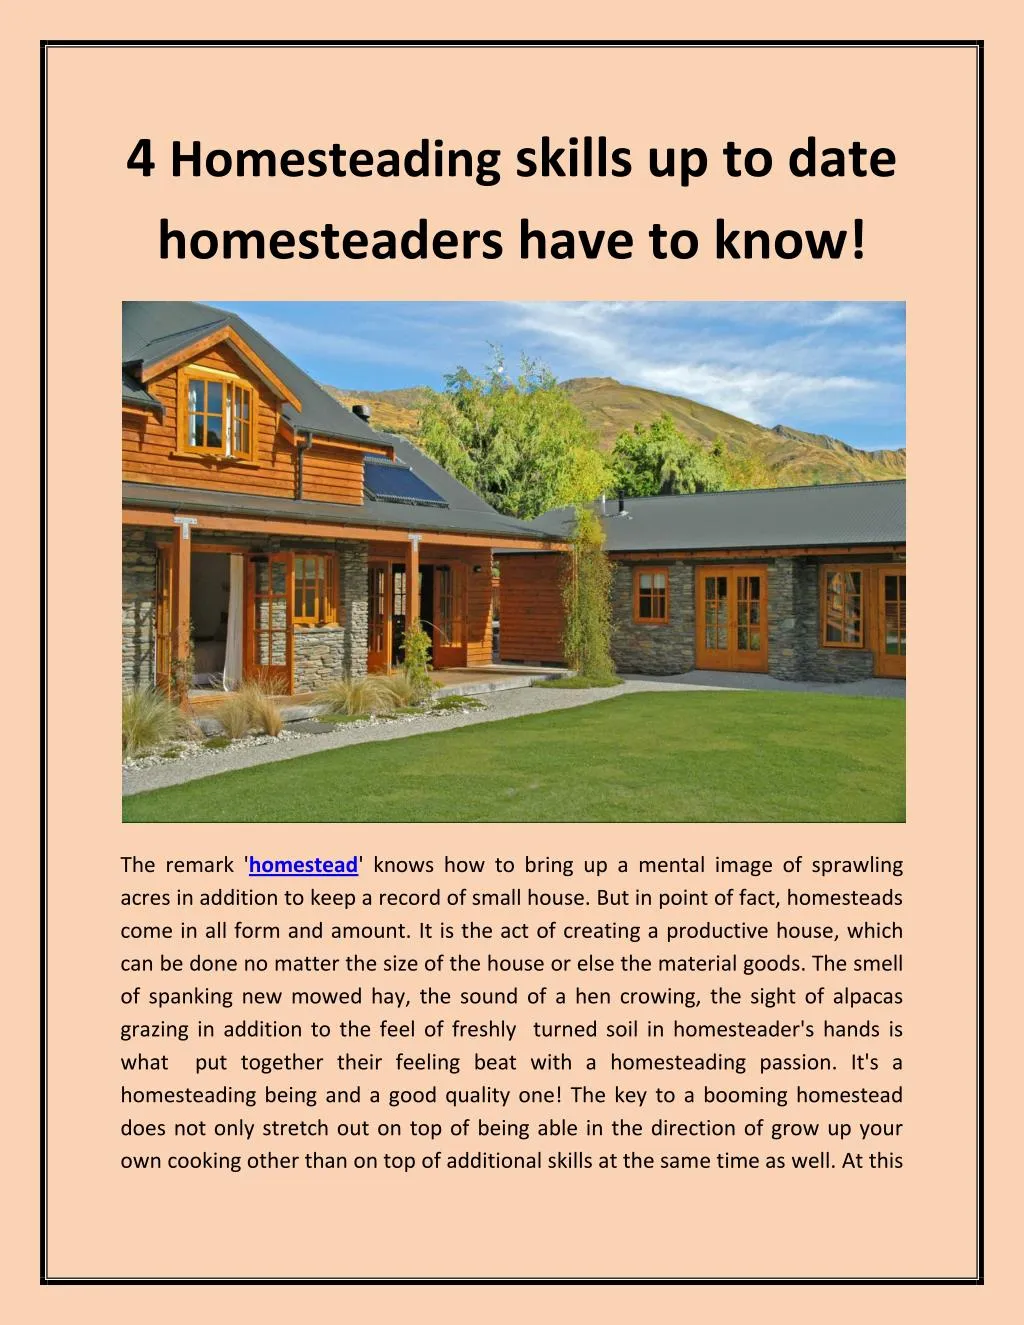 4 homesteading skills up to date homesteaders